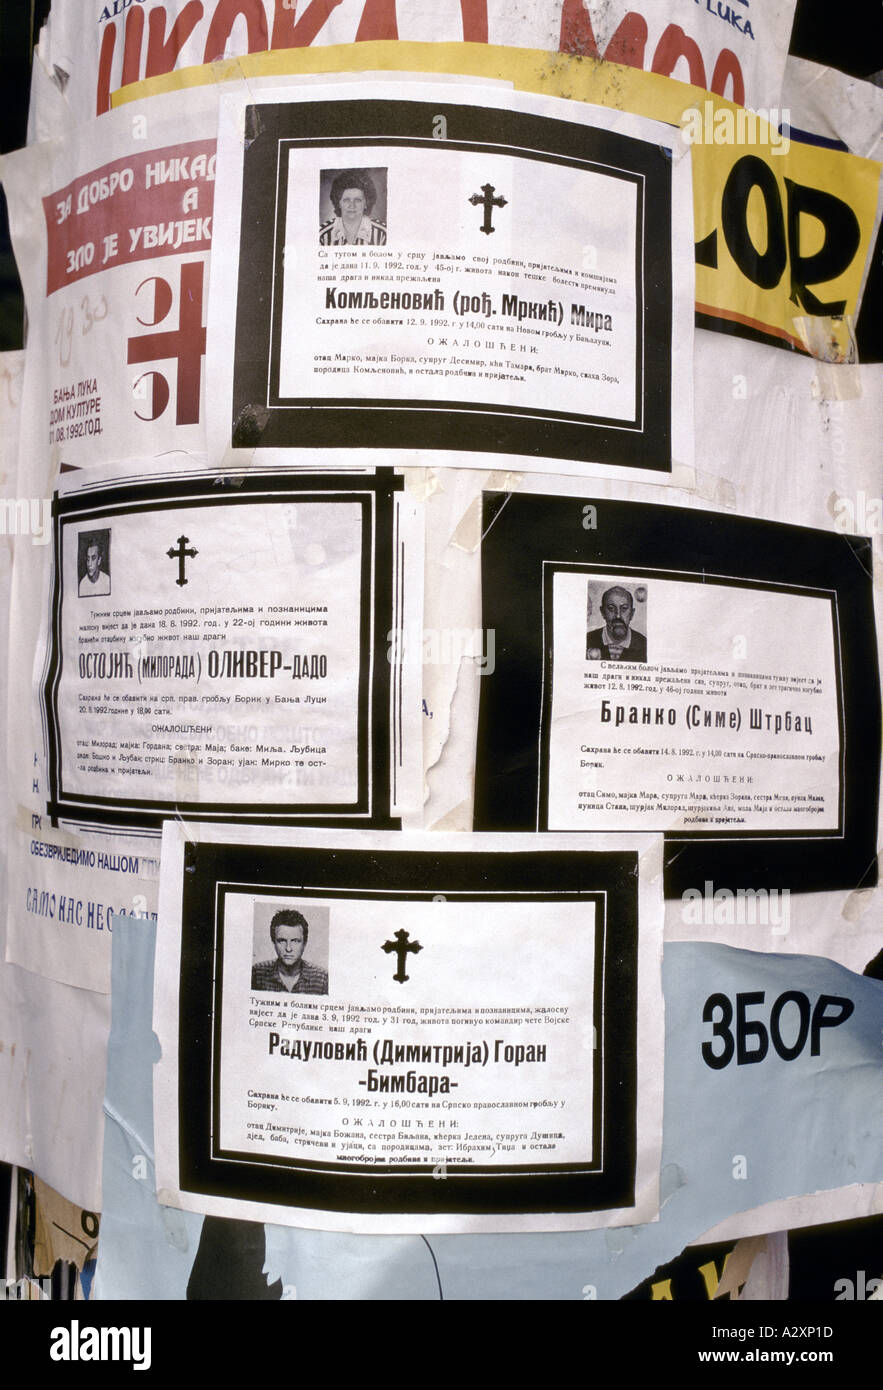 Banja Luka - death notices are pinned up in public places of people who have died in the civil war, Sept 1992 Stock Photo